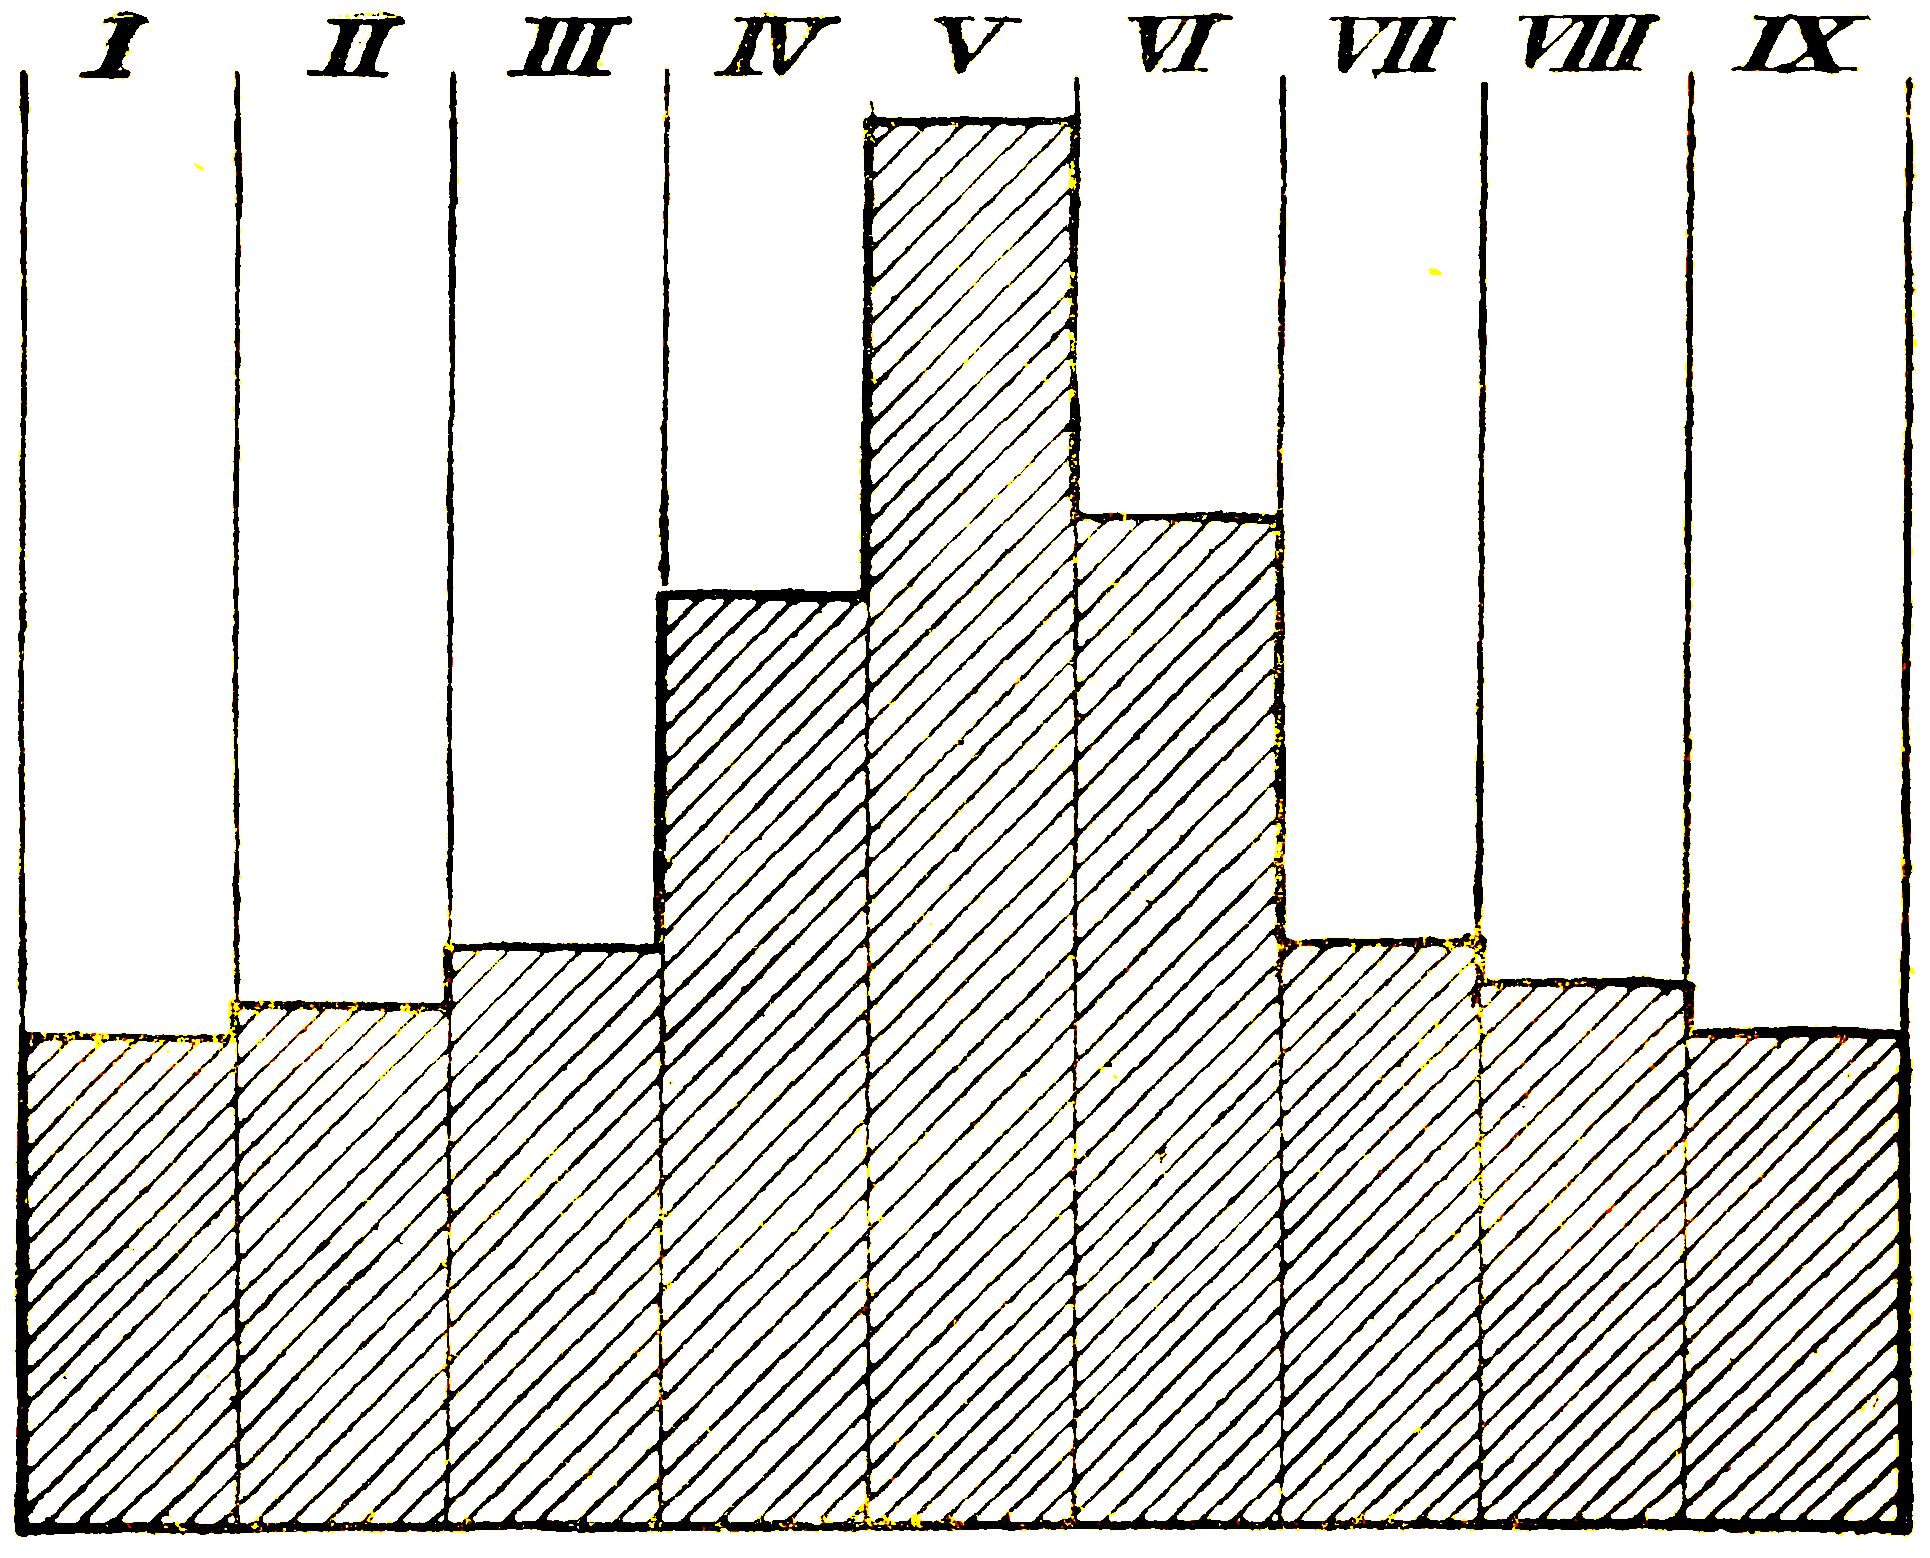 DIAGRAM OF STAR-DENSITY
From a table in The Stars (p. 249).